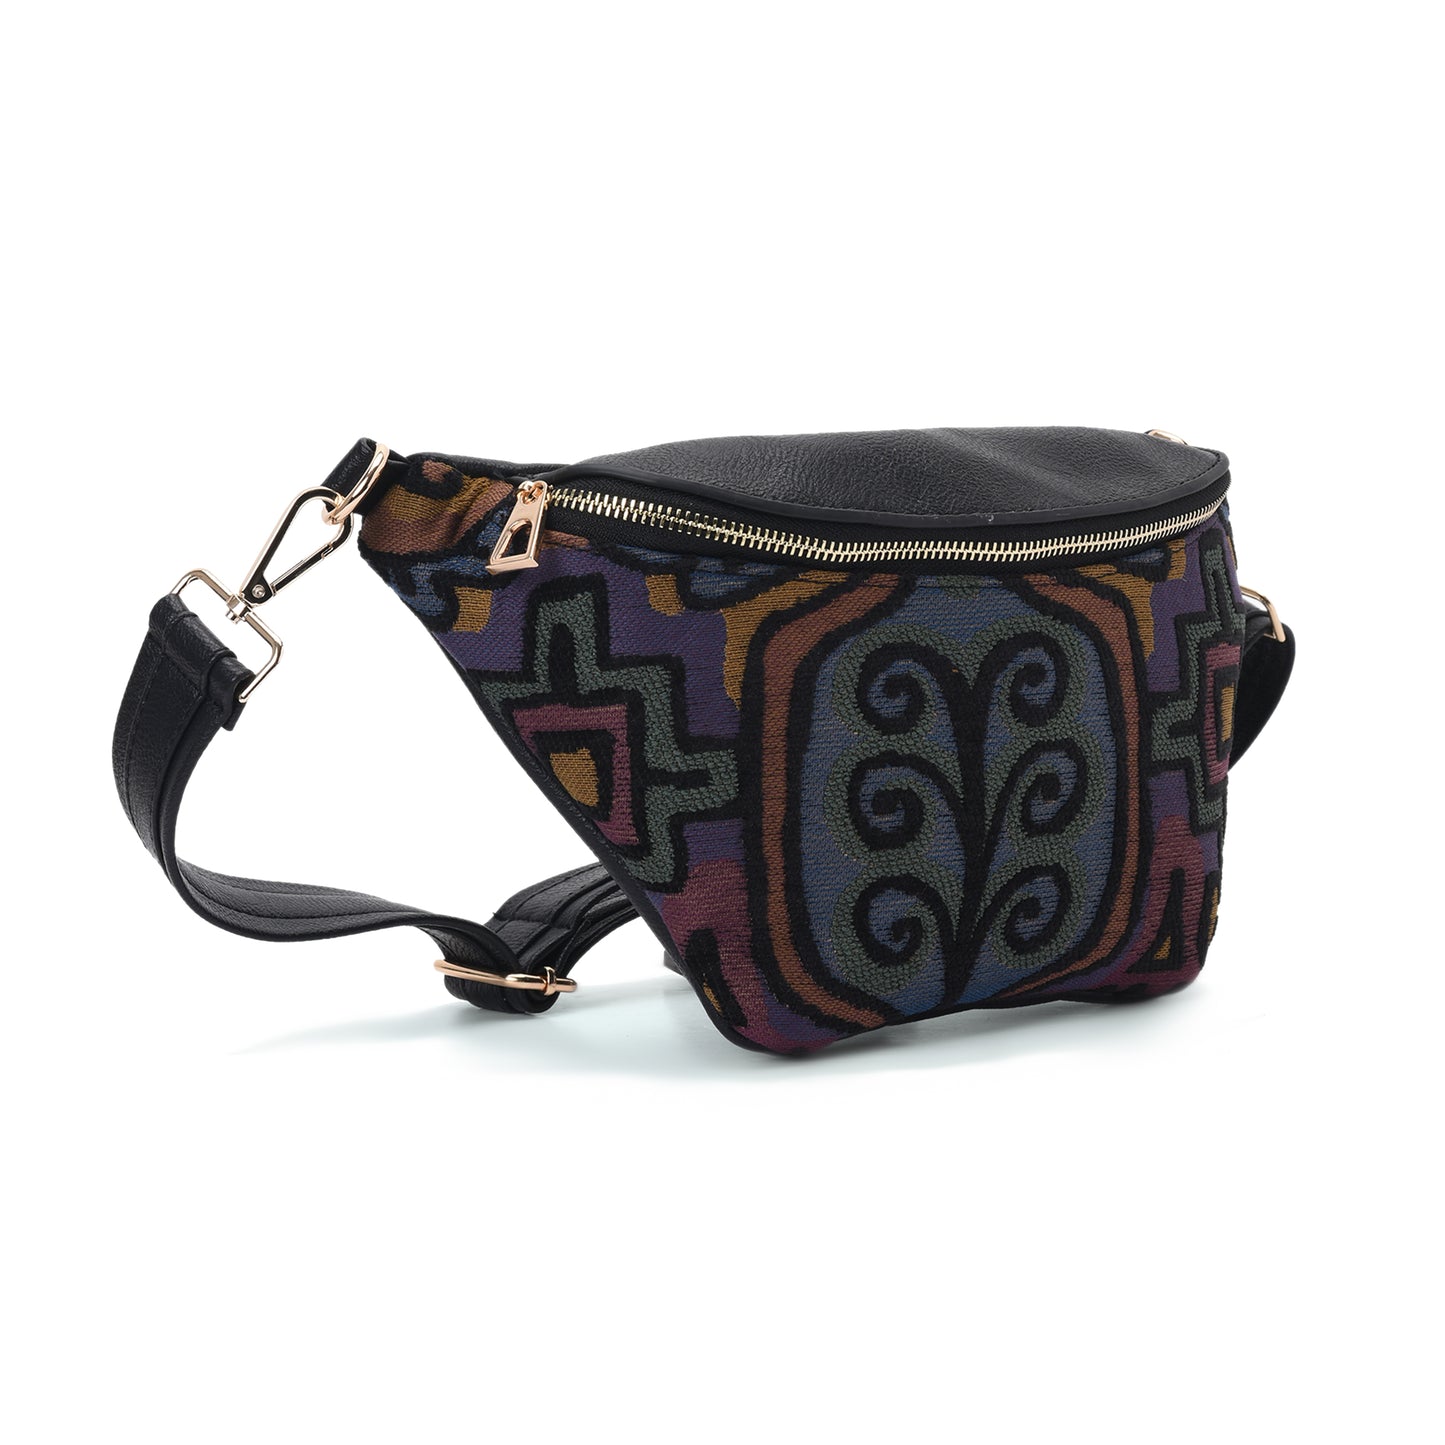 Fanny pack Black with Multi color